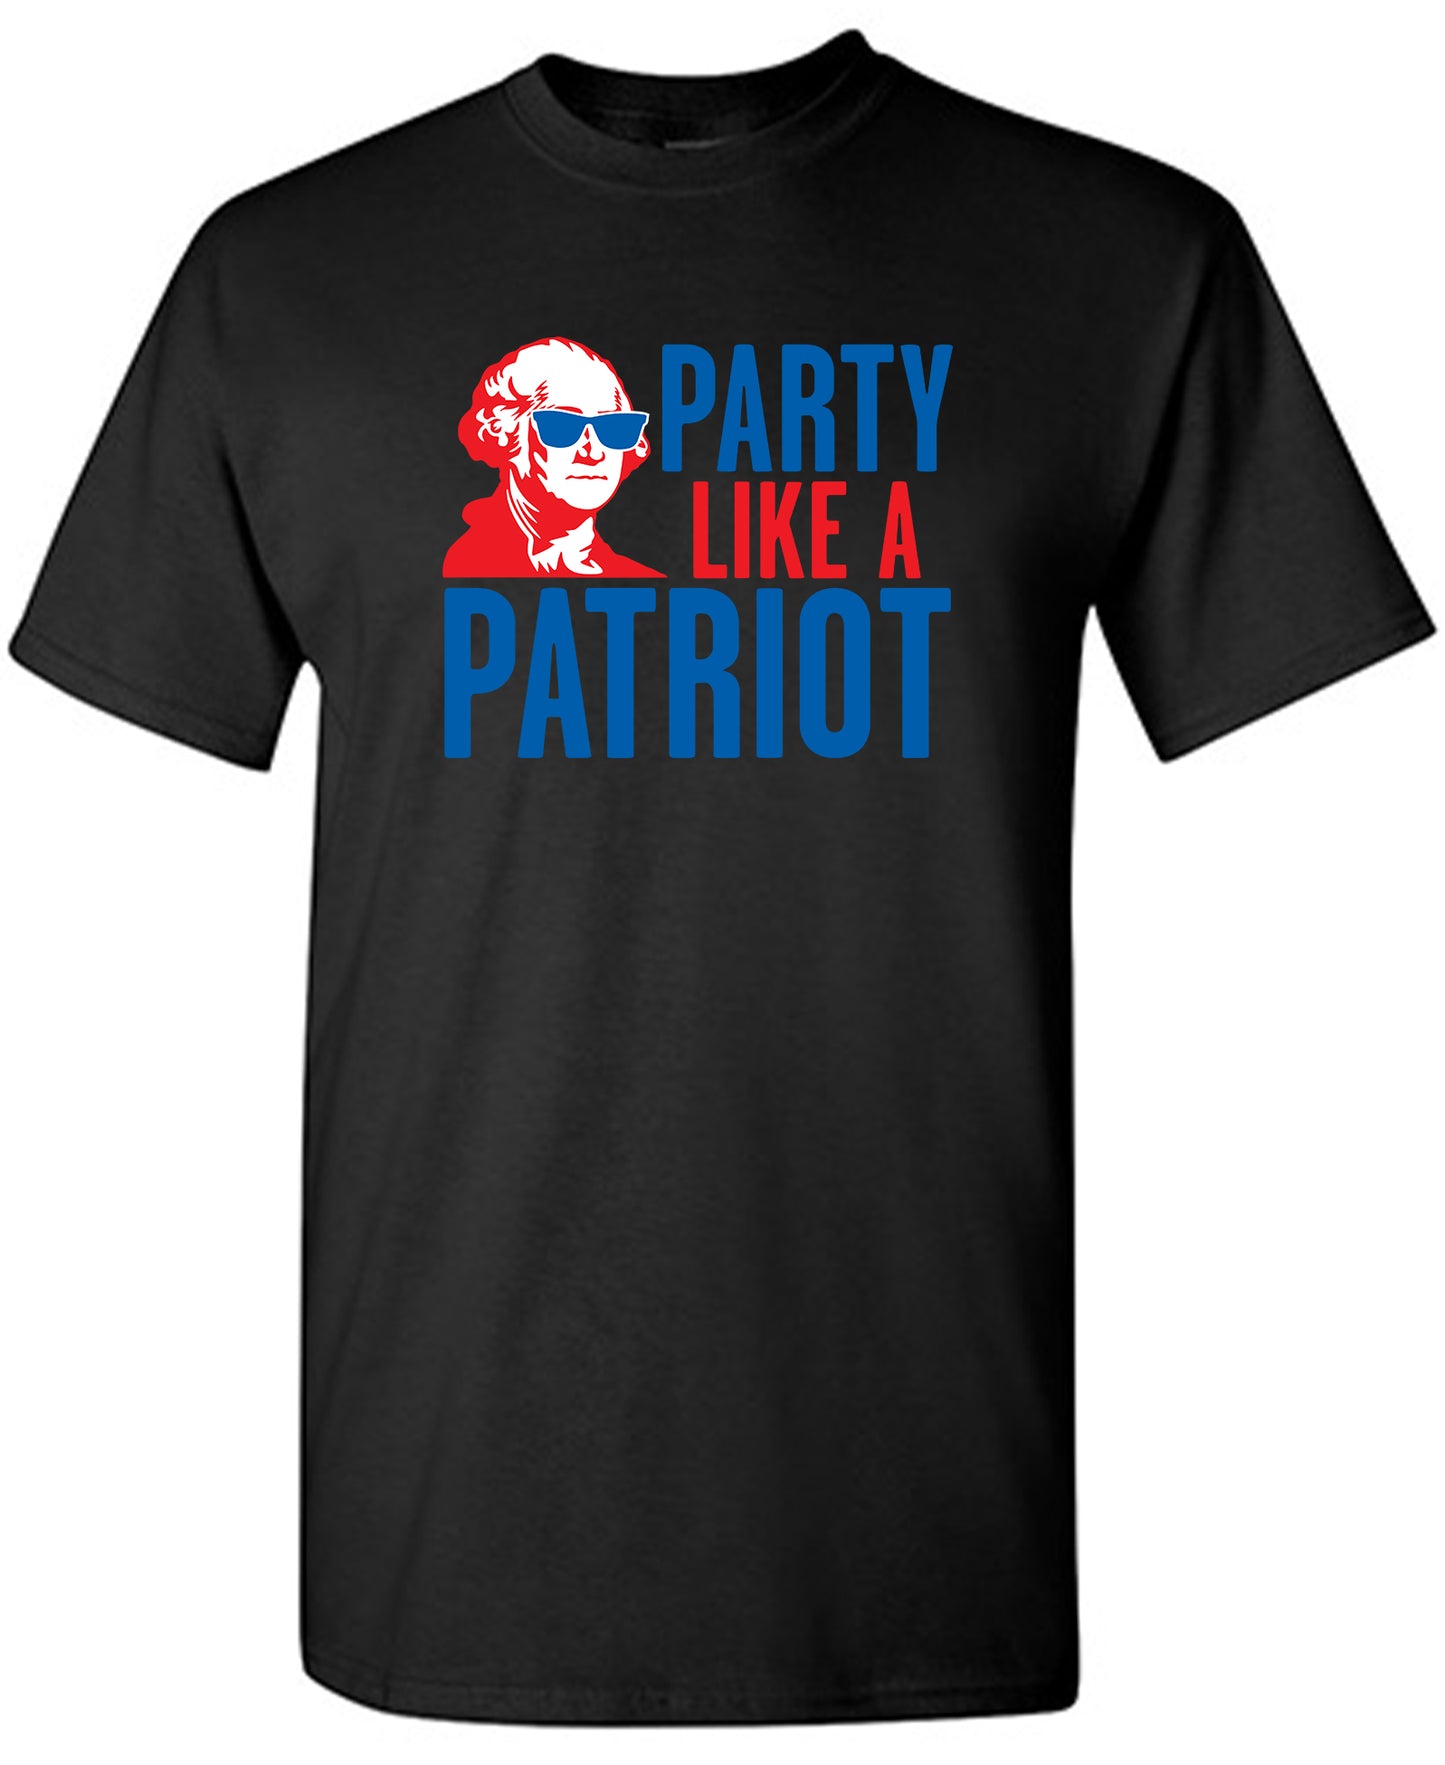 Funny T-Shirts design "Party Like A Patriot"